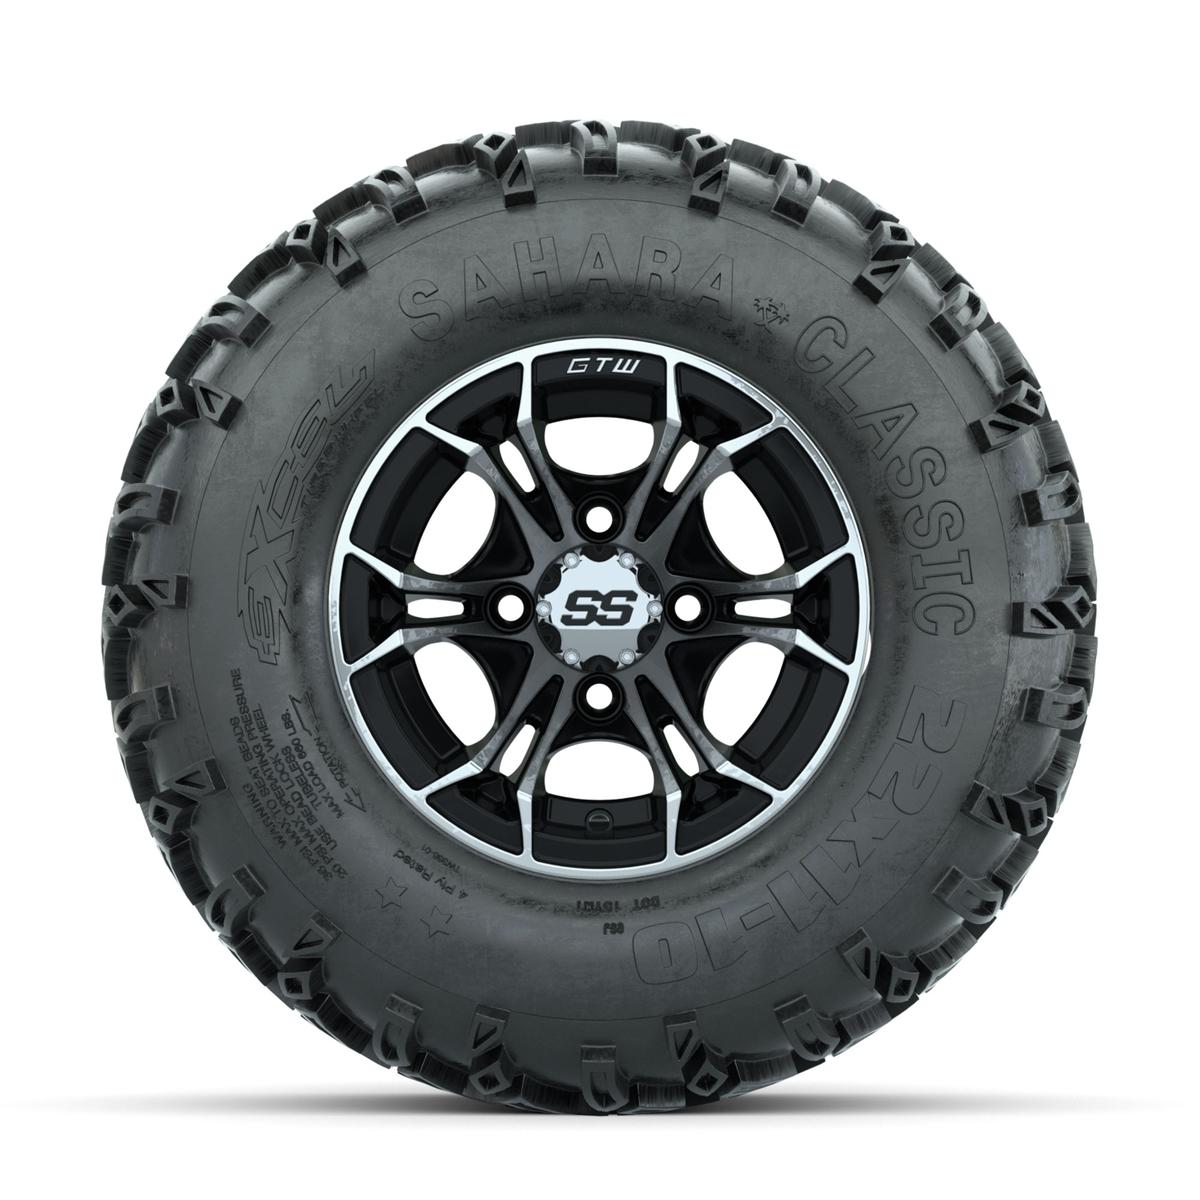 GTW Spyder Machined/Black 10 in Wheels with 22x11-10 Sahara Classic All Terrain Tires – Full Set